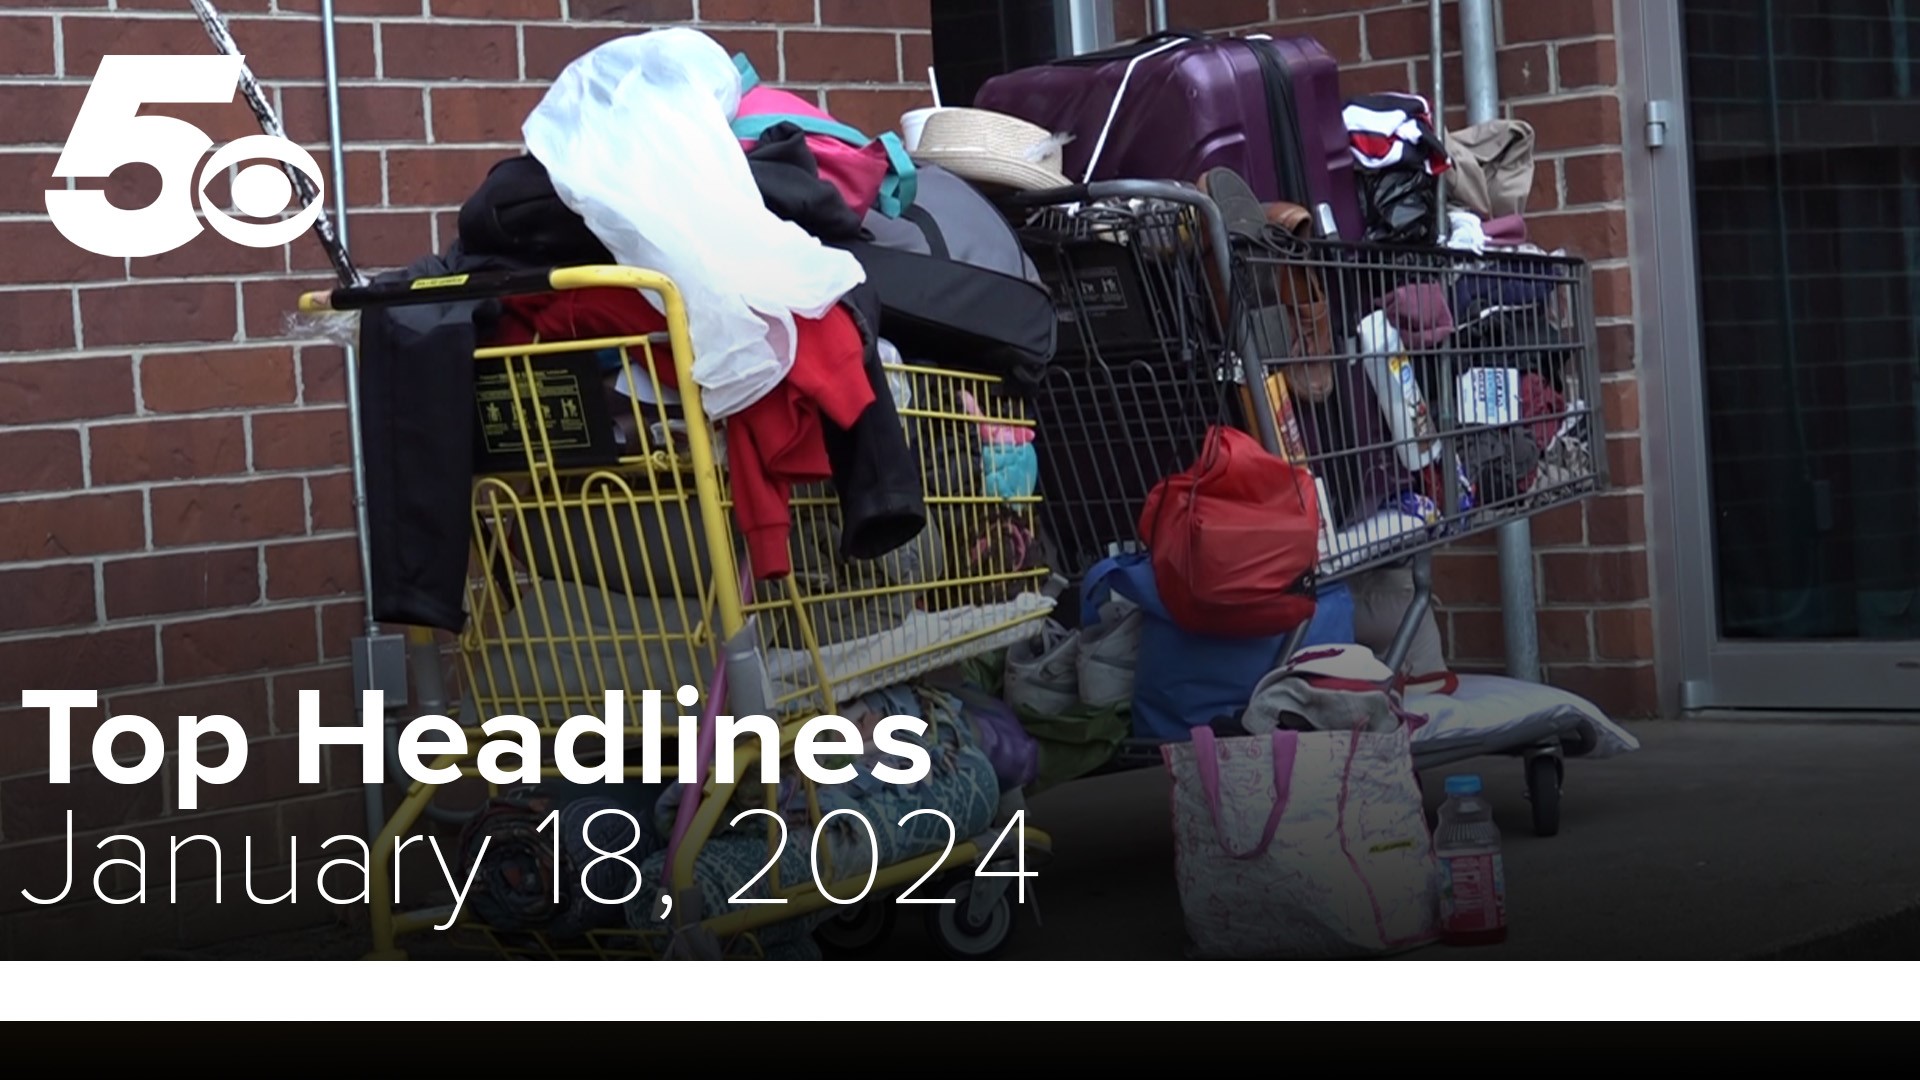 Don't miss out on today's Top Headlines for January 18, 2024.